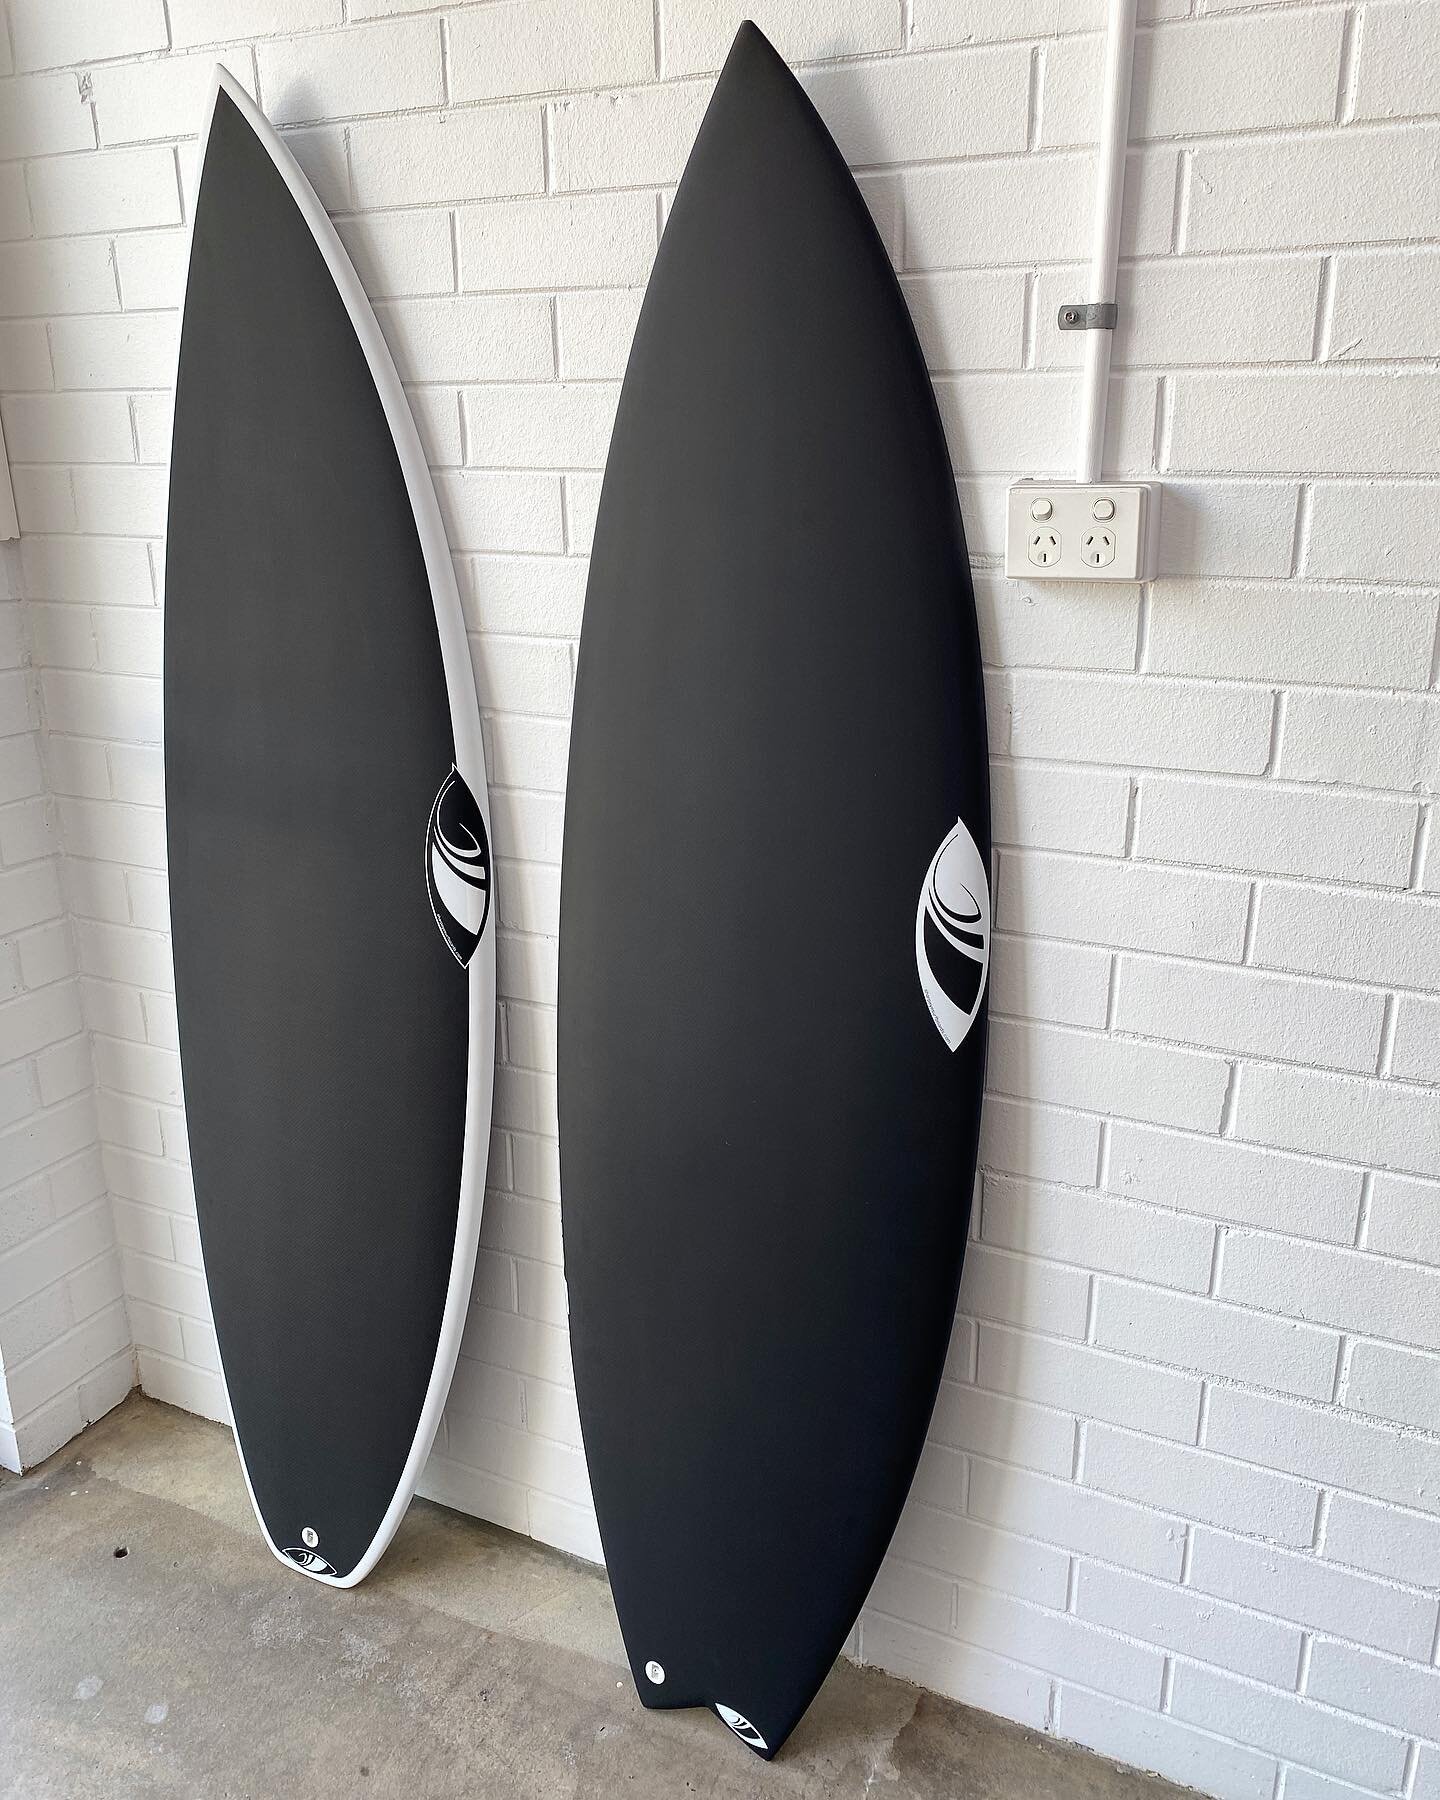 C1-Carbon, a next generation carbon construction from @sharpeyesurfboards_au 😱 

NEW C1 Carbon in the INFERNO 72 &amp; INFERNO FT now in store !!
Get in quick, they are feeling absolutely next level and these will not last long 🔥 

Sizes and more i